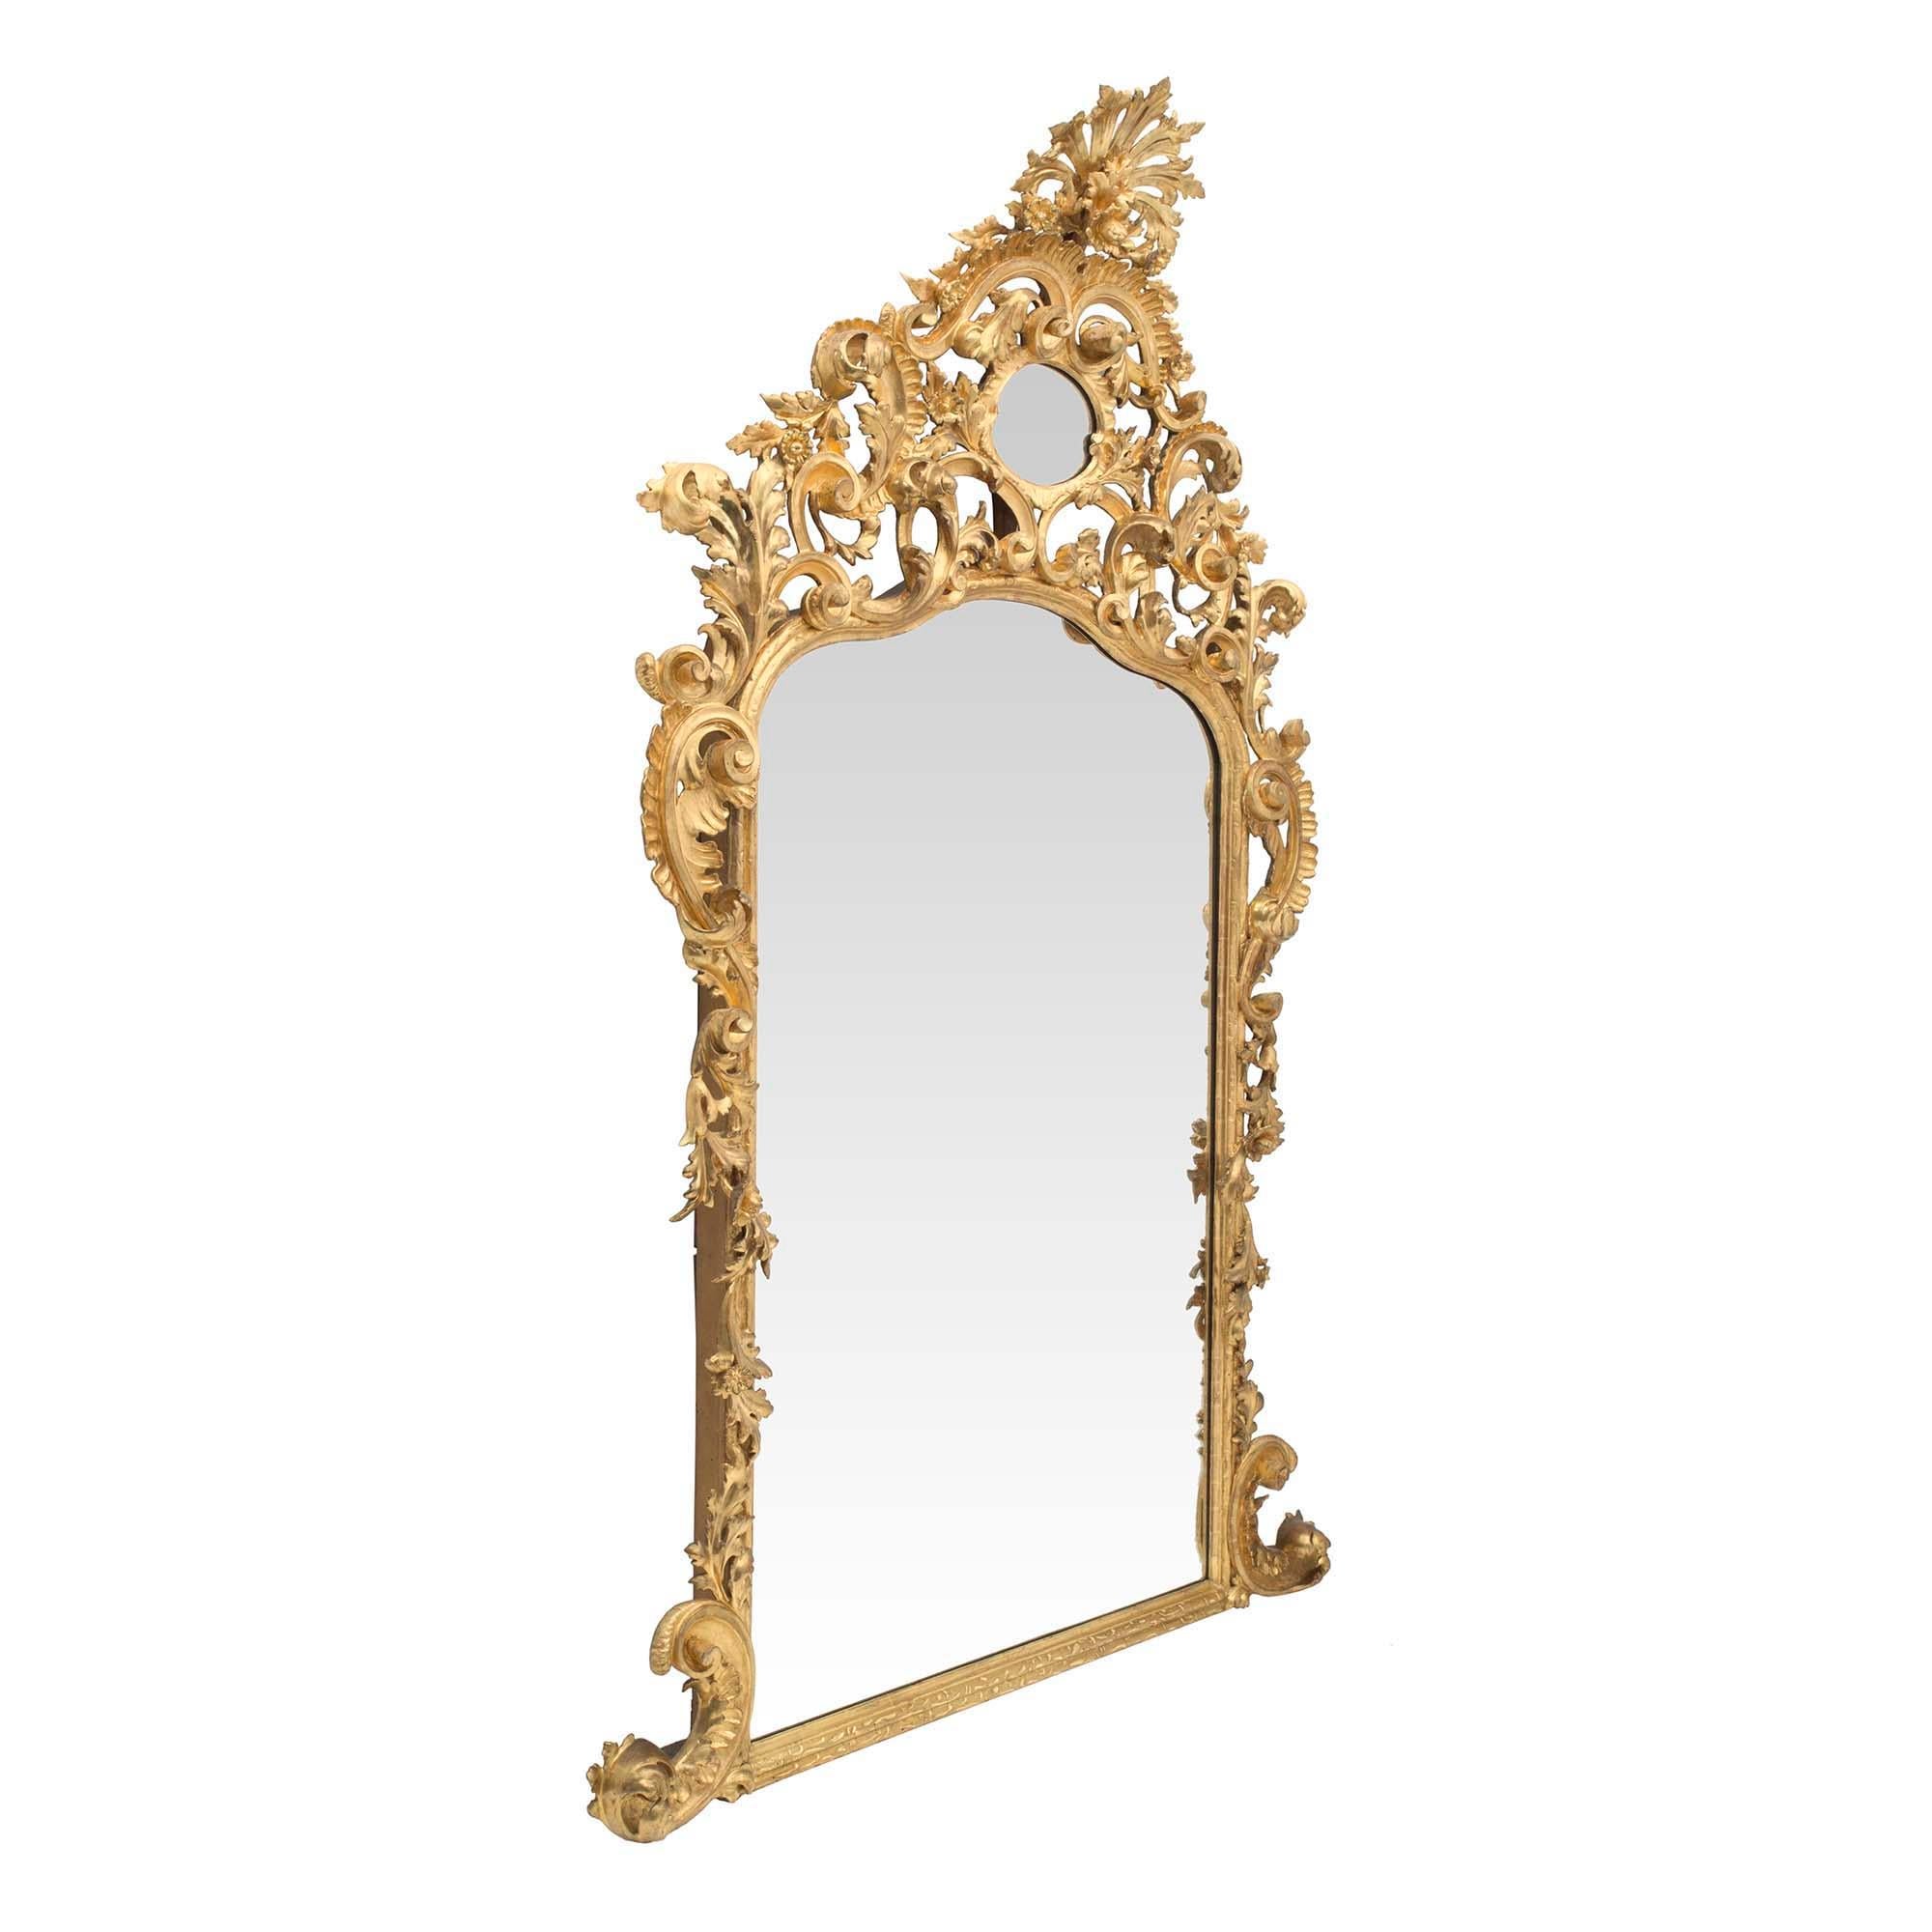 An exceptional quality and large scale Italian early 19th century Baroque giltwood mirror. The bottom of the mirror has a mottled frame with stately 'C' scrolls on each end. The mottled frame continues on both sides with a wrap around foliate